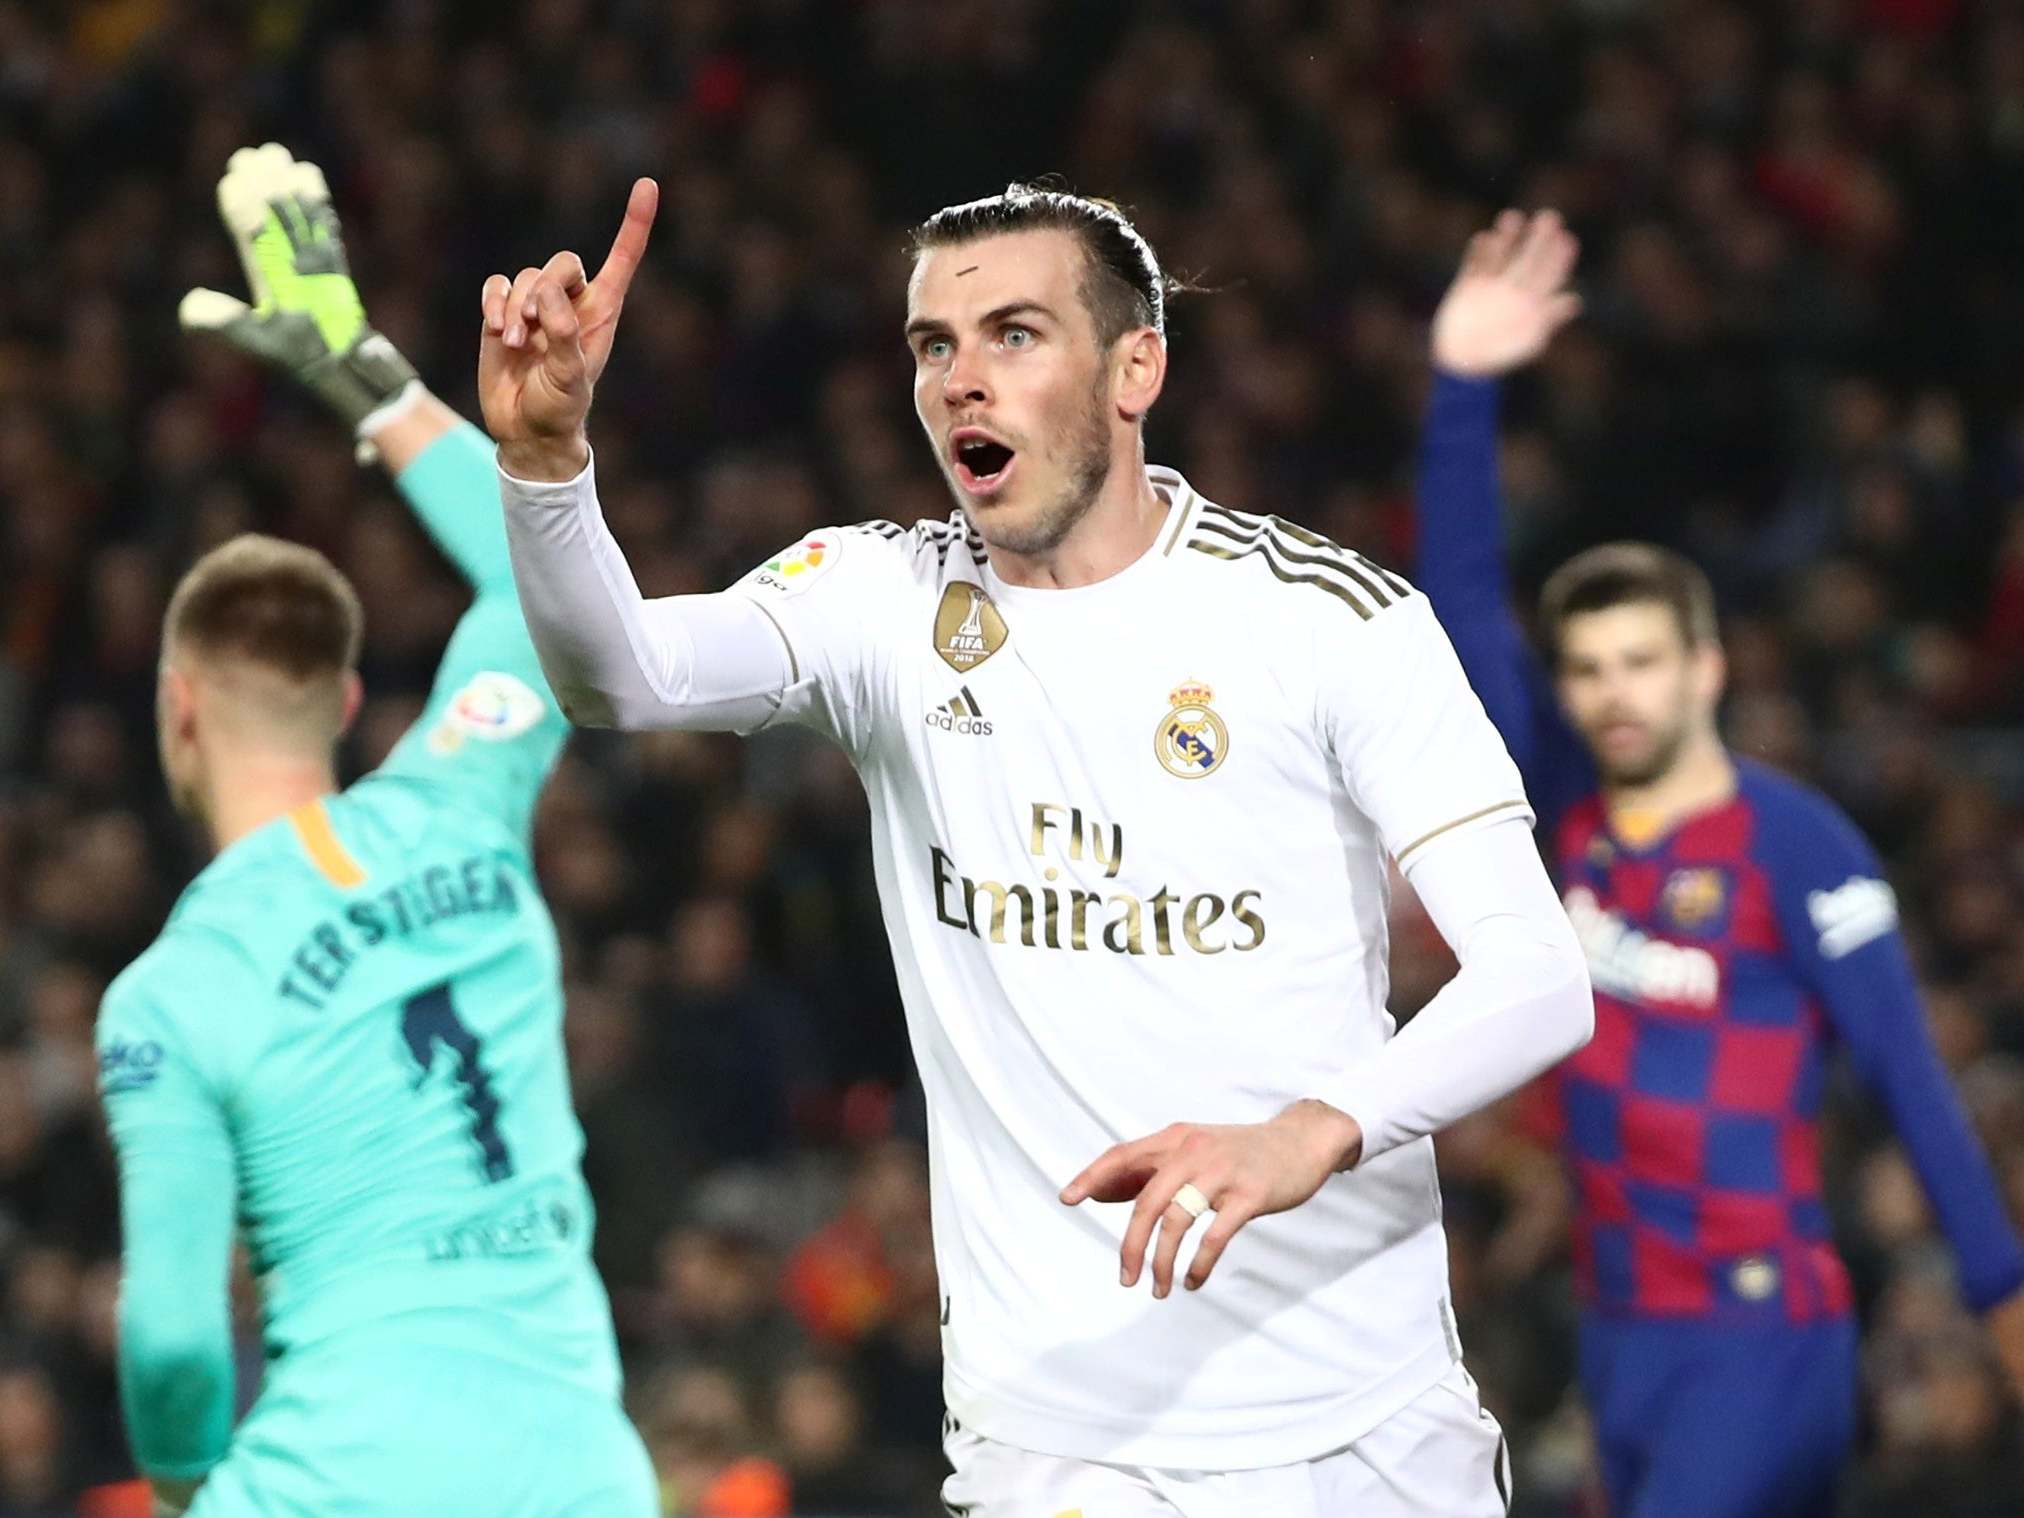 Gareth Bale’s disallowed goal left the Clasico goalless for the first time since 2002